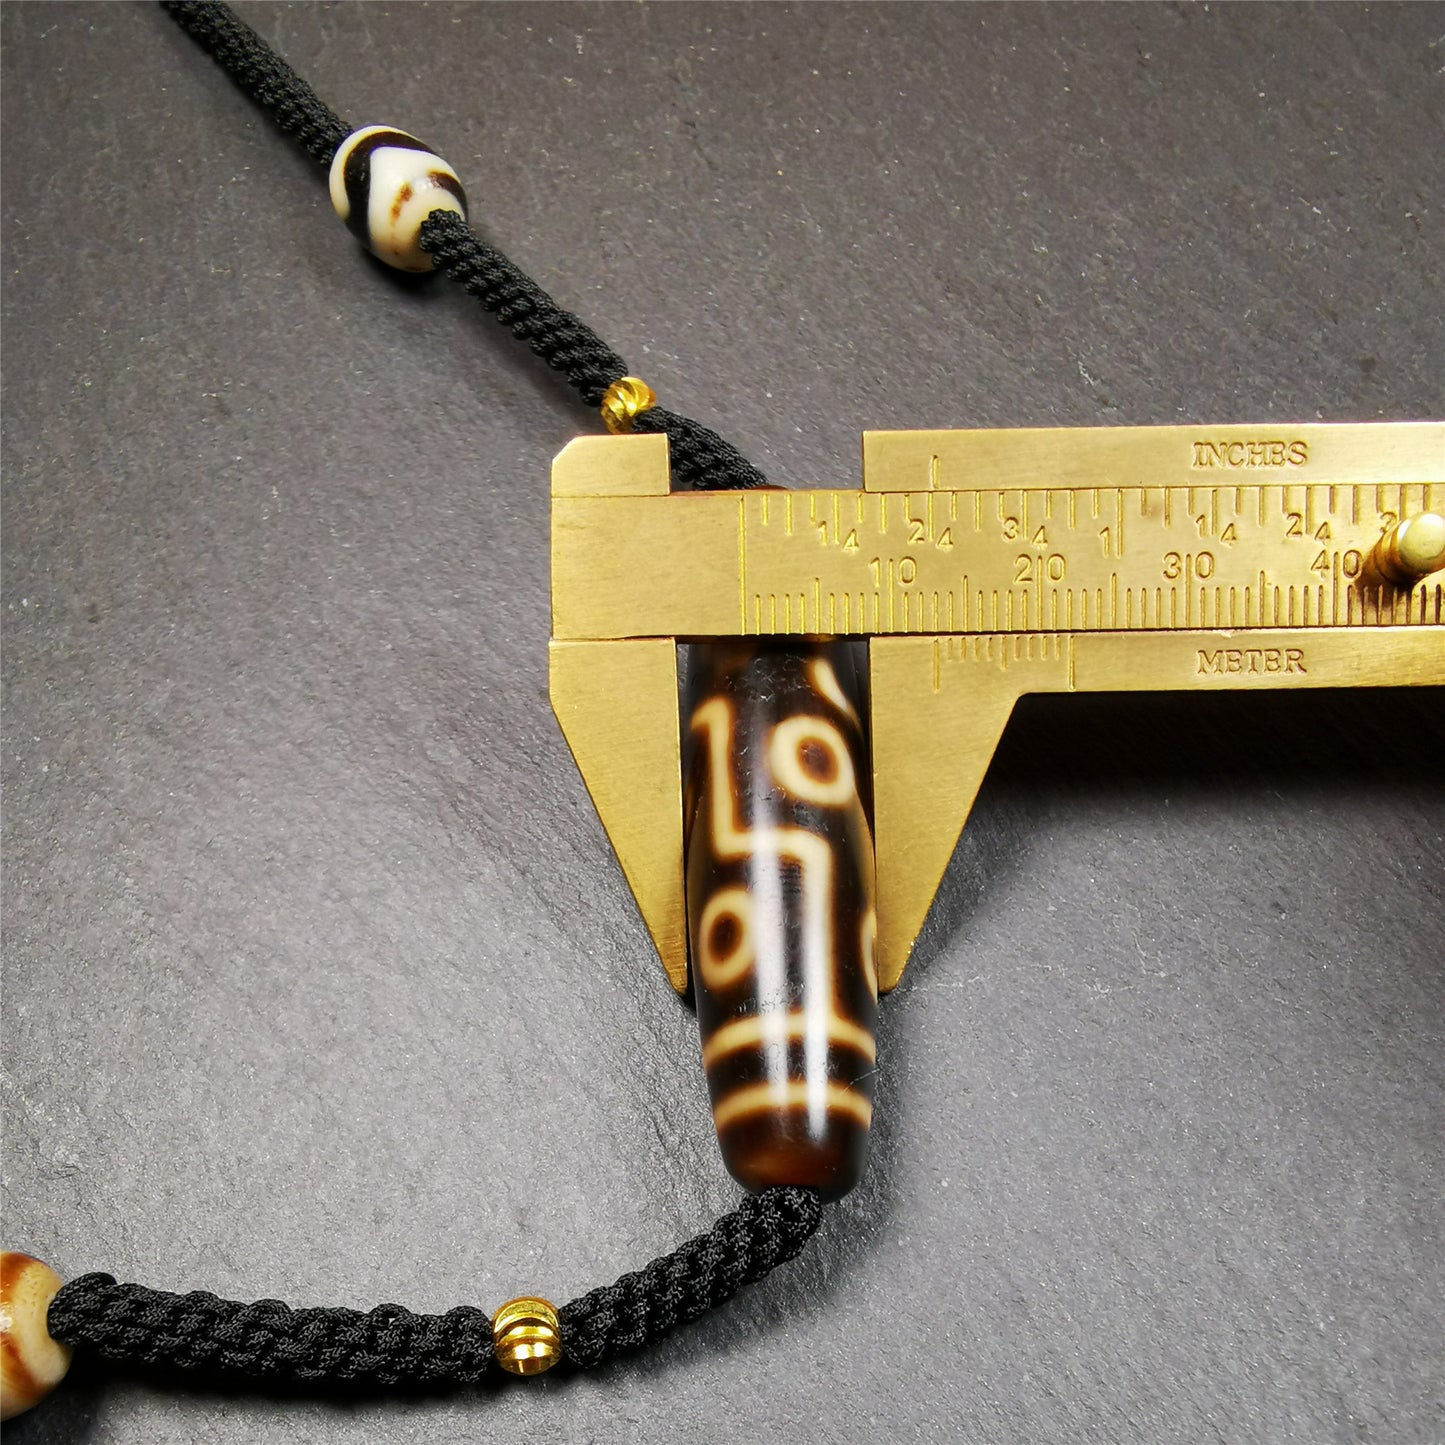 This necklace was hand-woven by Tibetans from Baiyu County, the main bead is a 9 eyed  dzi bead, paired with 2 small tiger tooth dzi beads,about 30 years old. It can be worn as a fashionable accessory,holds cultural and religious significance.